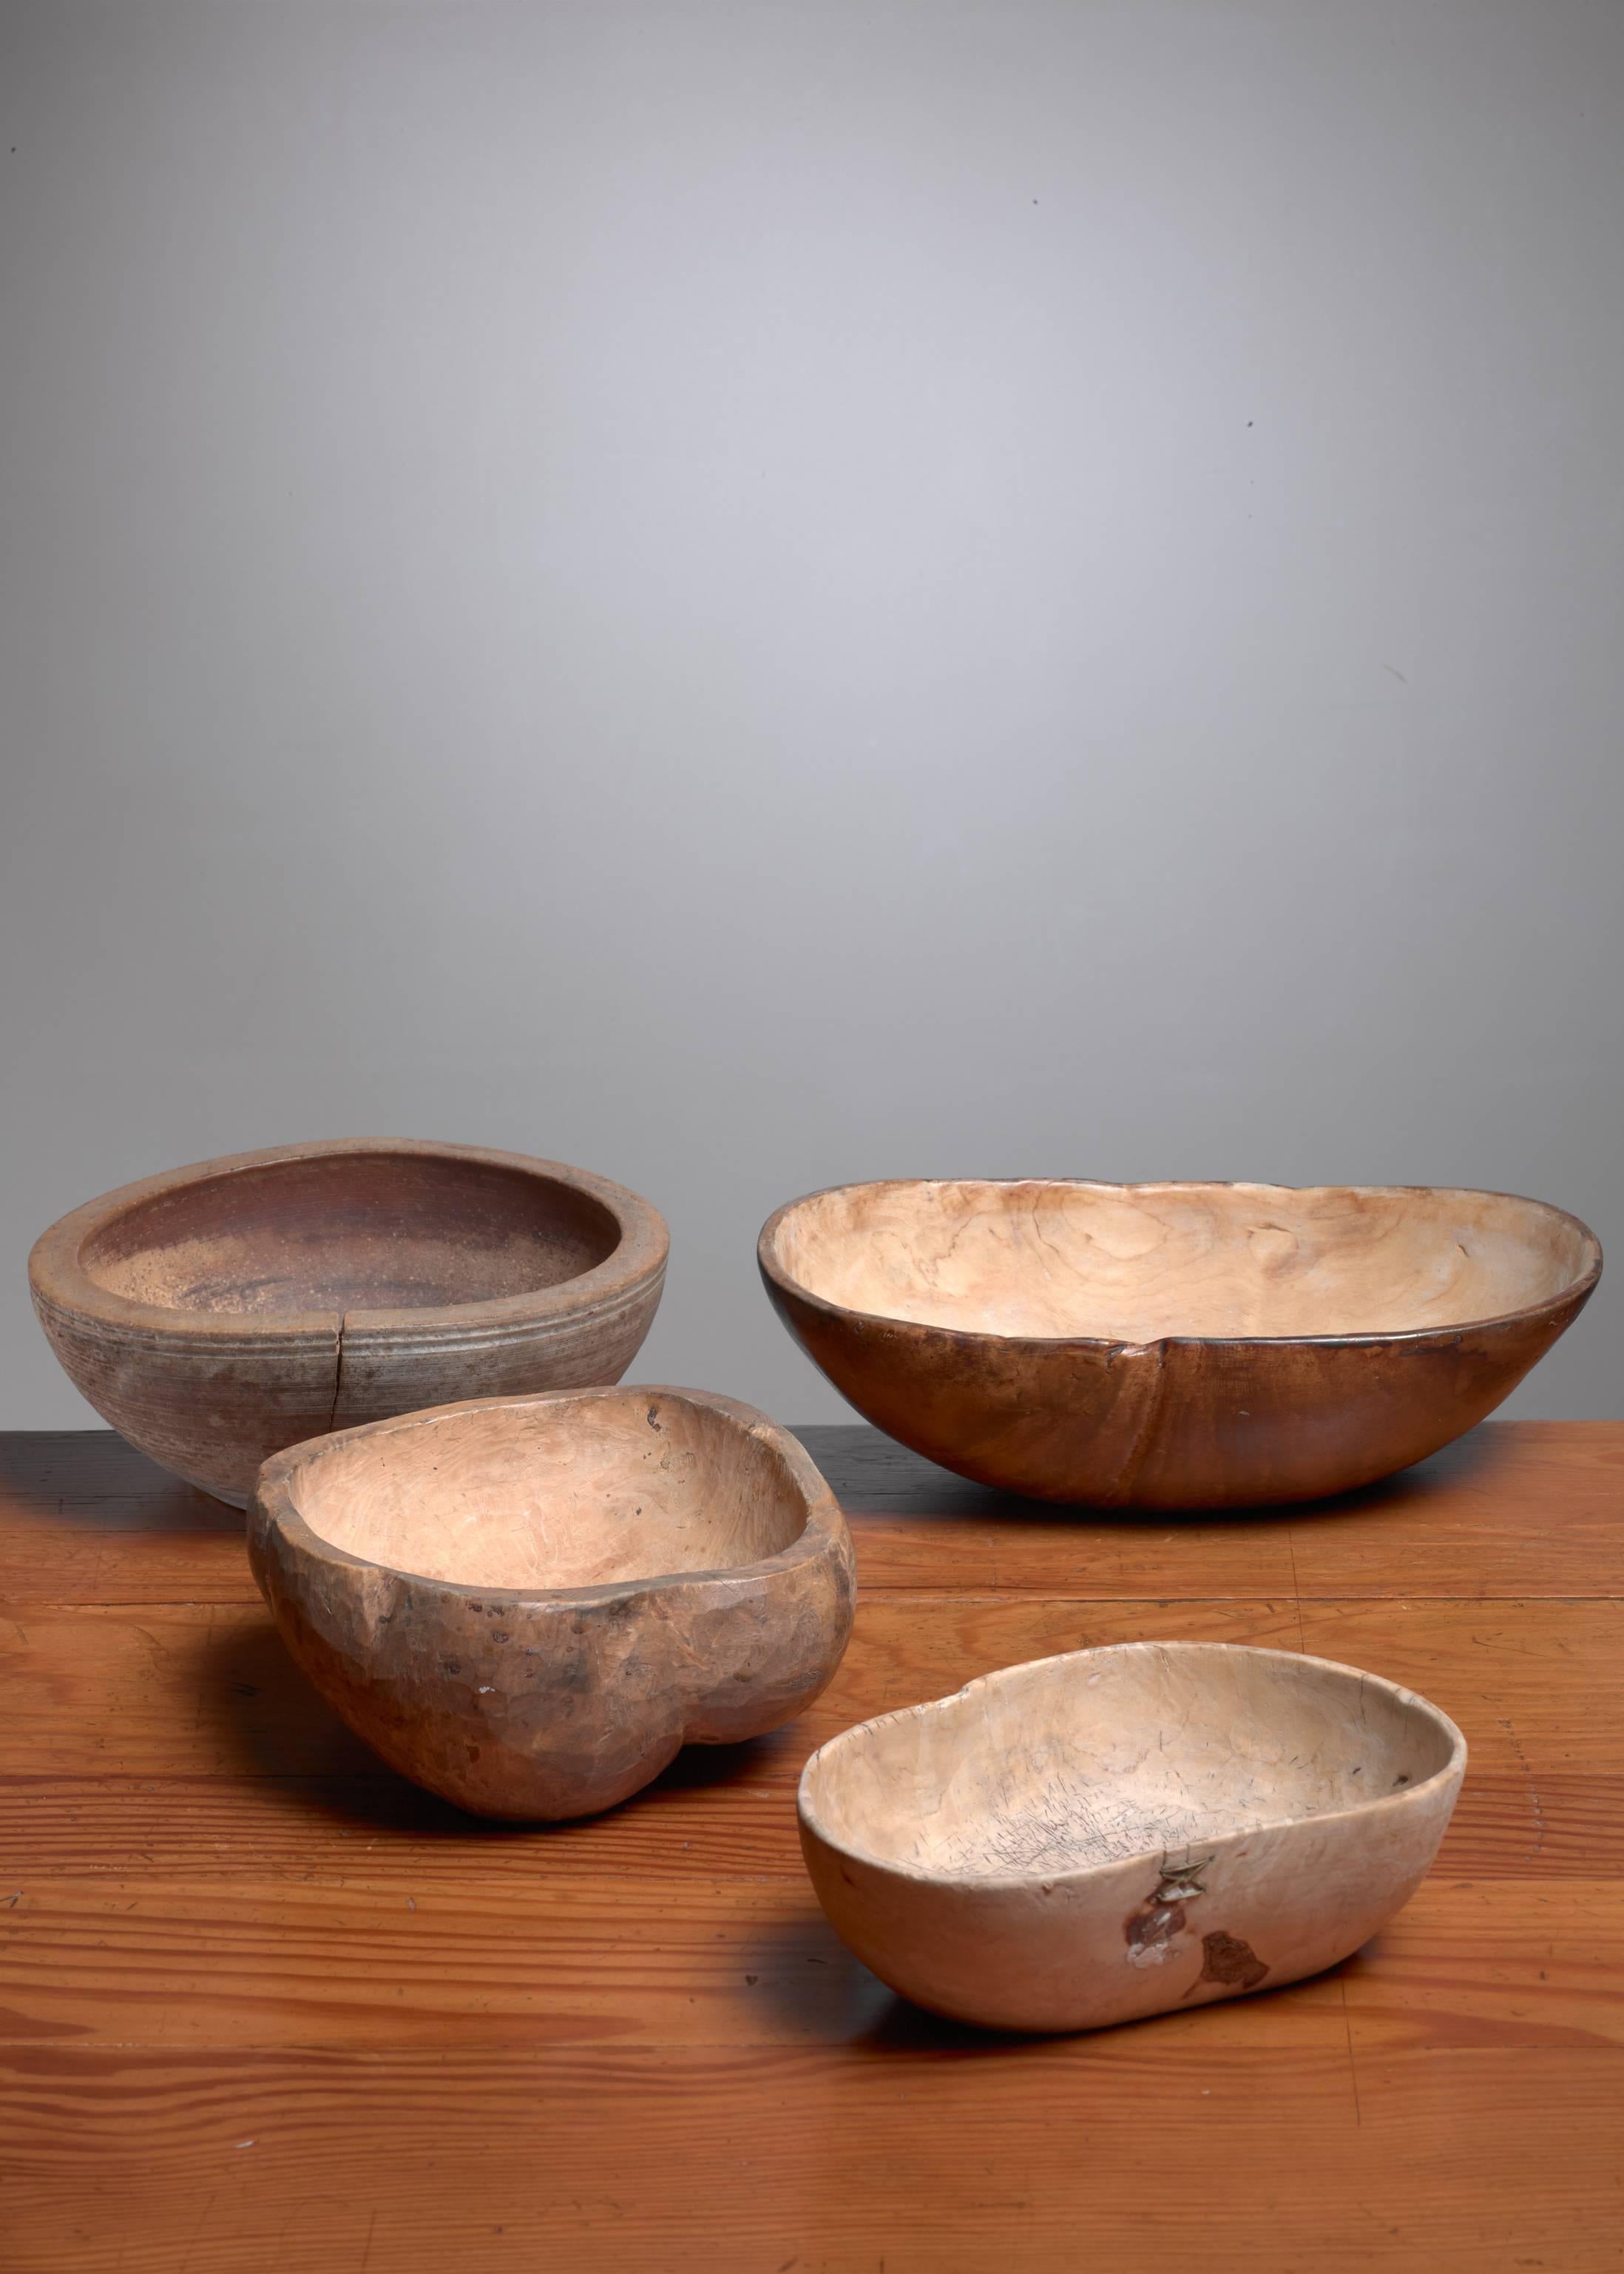 A set of four 19th century Folk Art wooden bowls from Sweden.

The two round bowls have a 23/24 cm (ca. 9 inch) diameter and are 9/10 cm (circa 3.5 inch) high. The other smaller bowl is 20 by 14.5 cm (8 inch by 5.5 inch) and is 7 cm (2.8 inch) high.